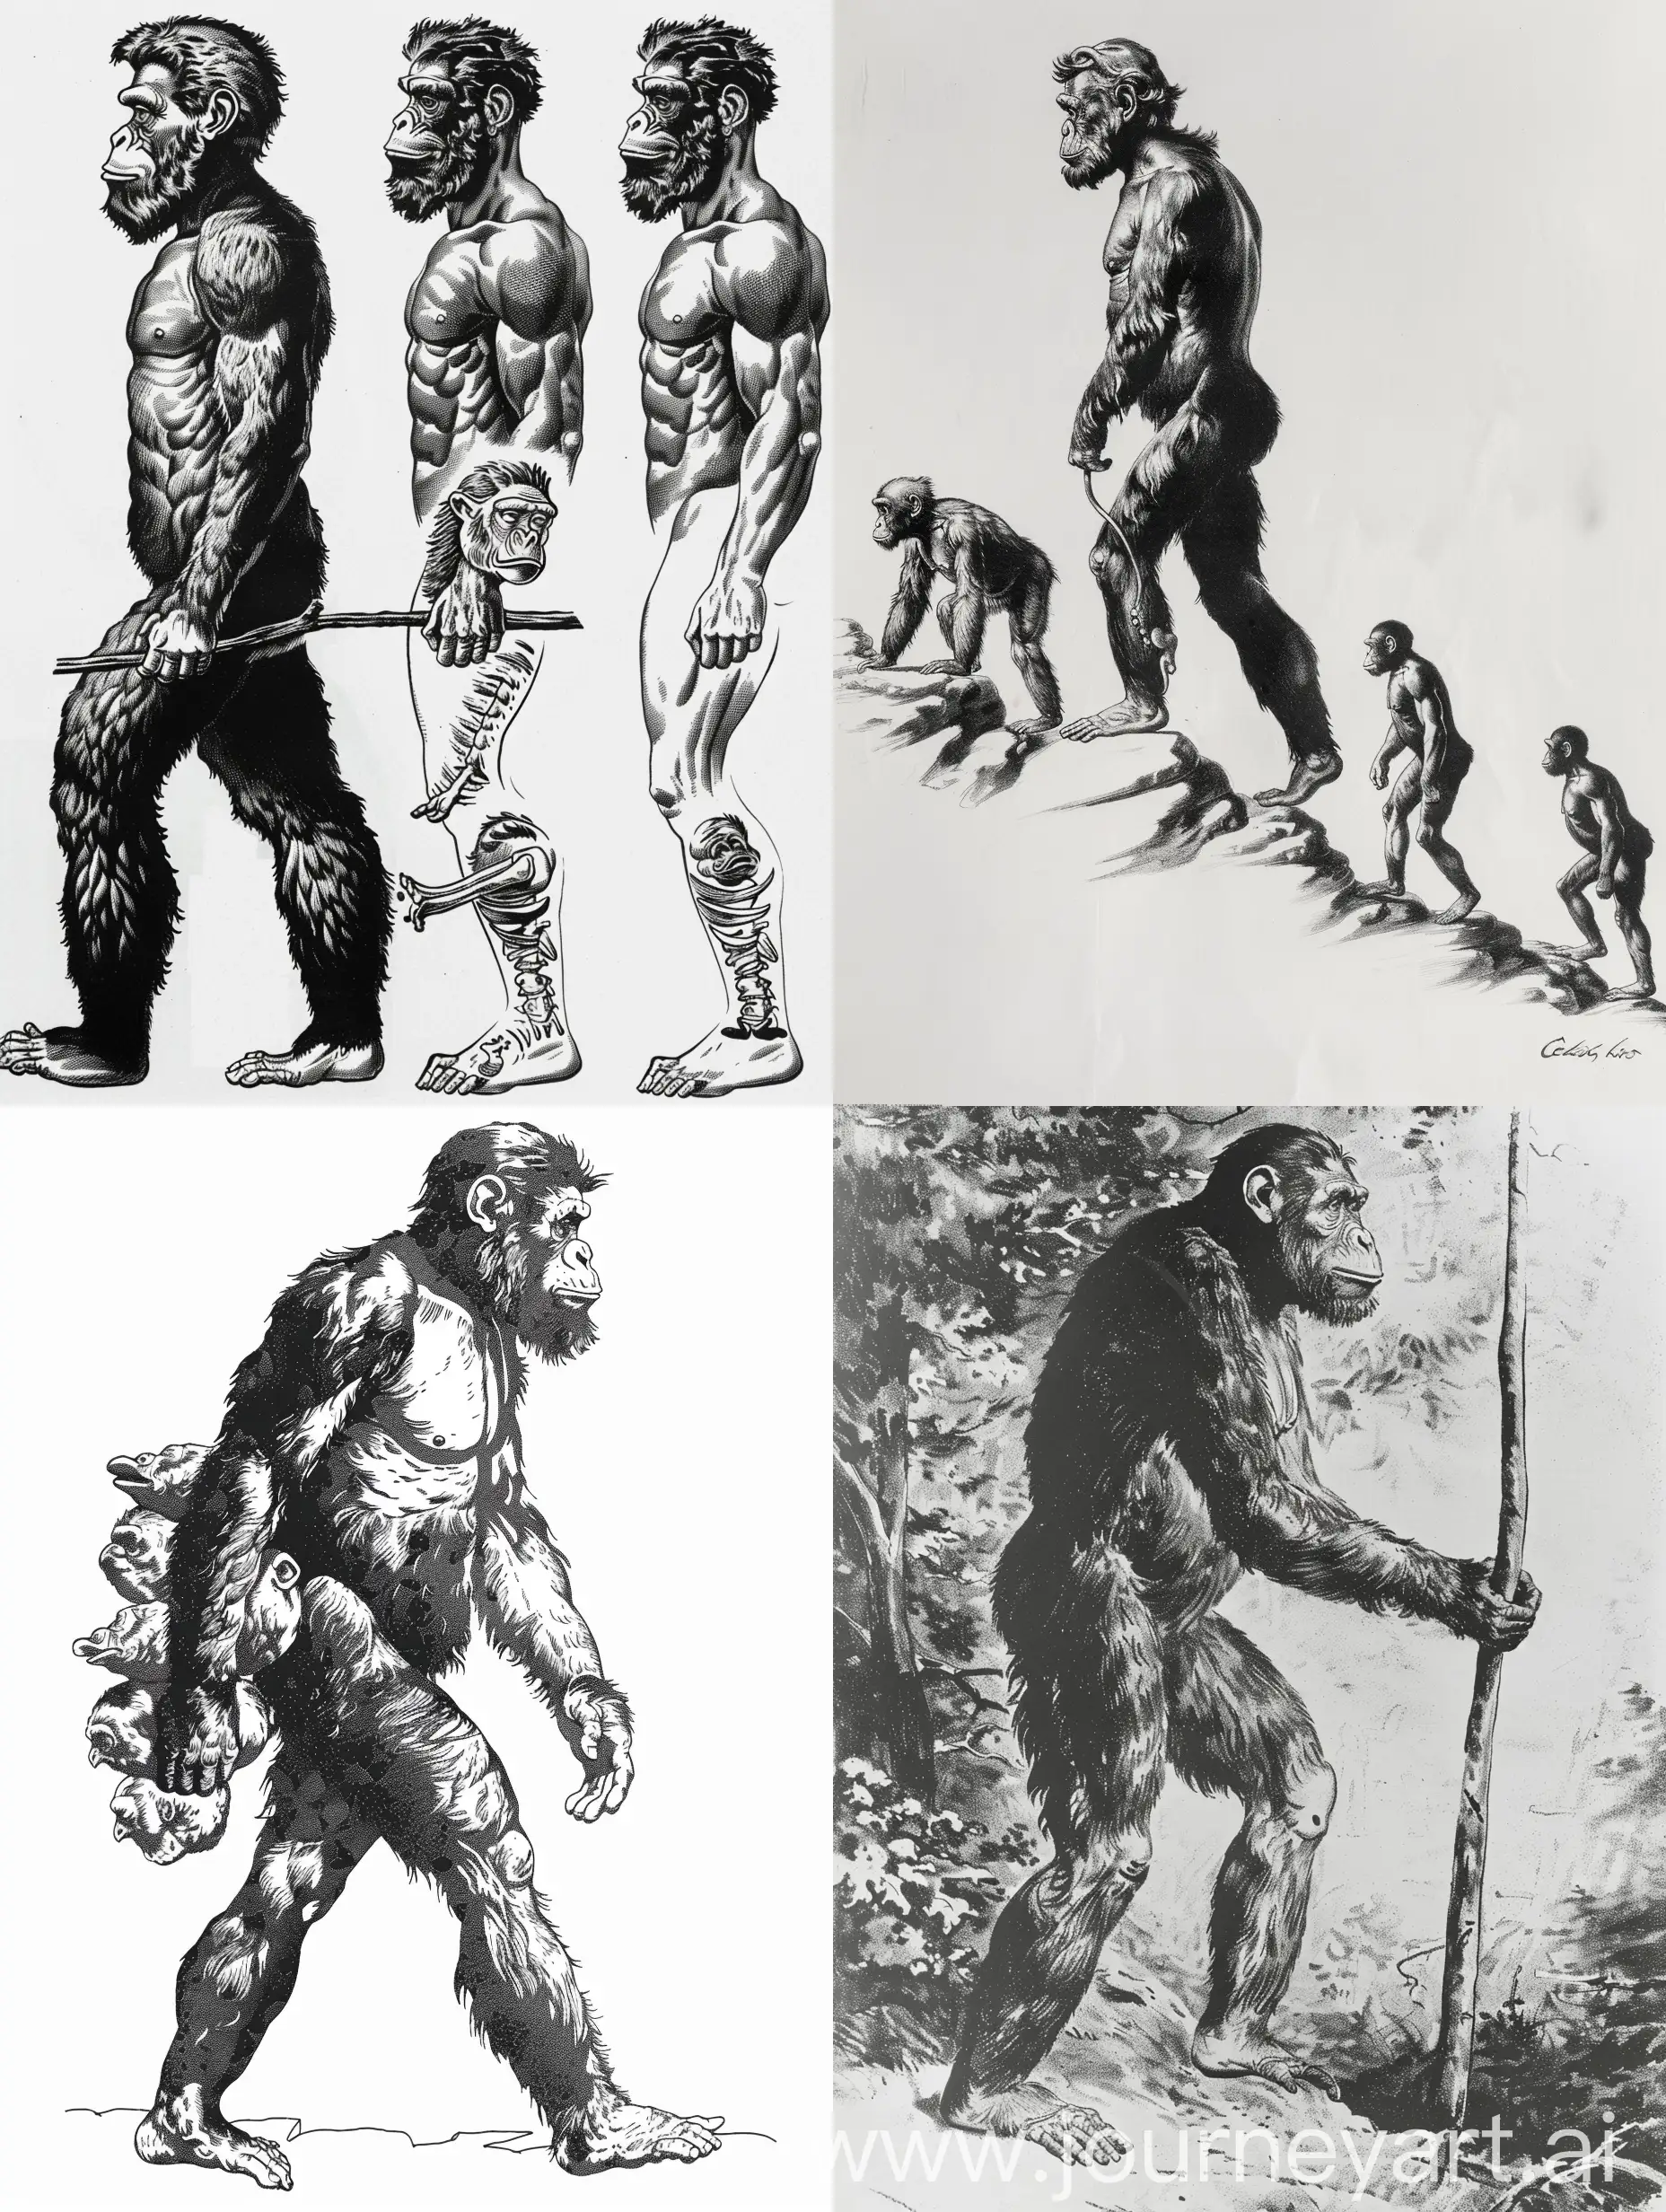 Evolution-of-Man-From-Ape-to-Modern-Human-in-Black-and-White